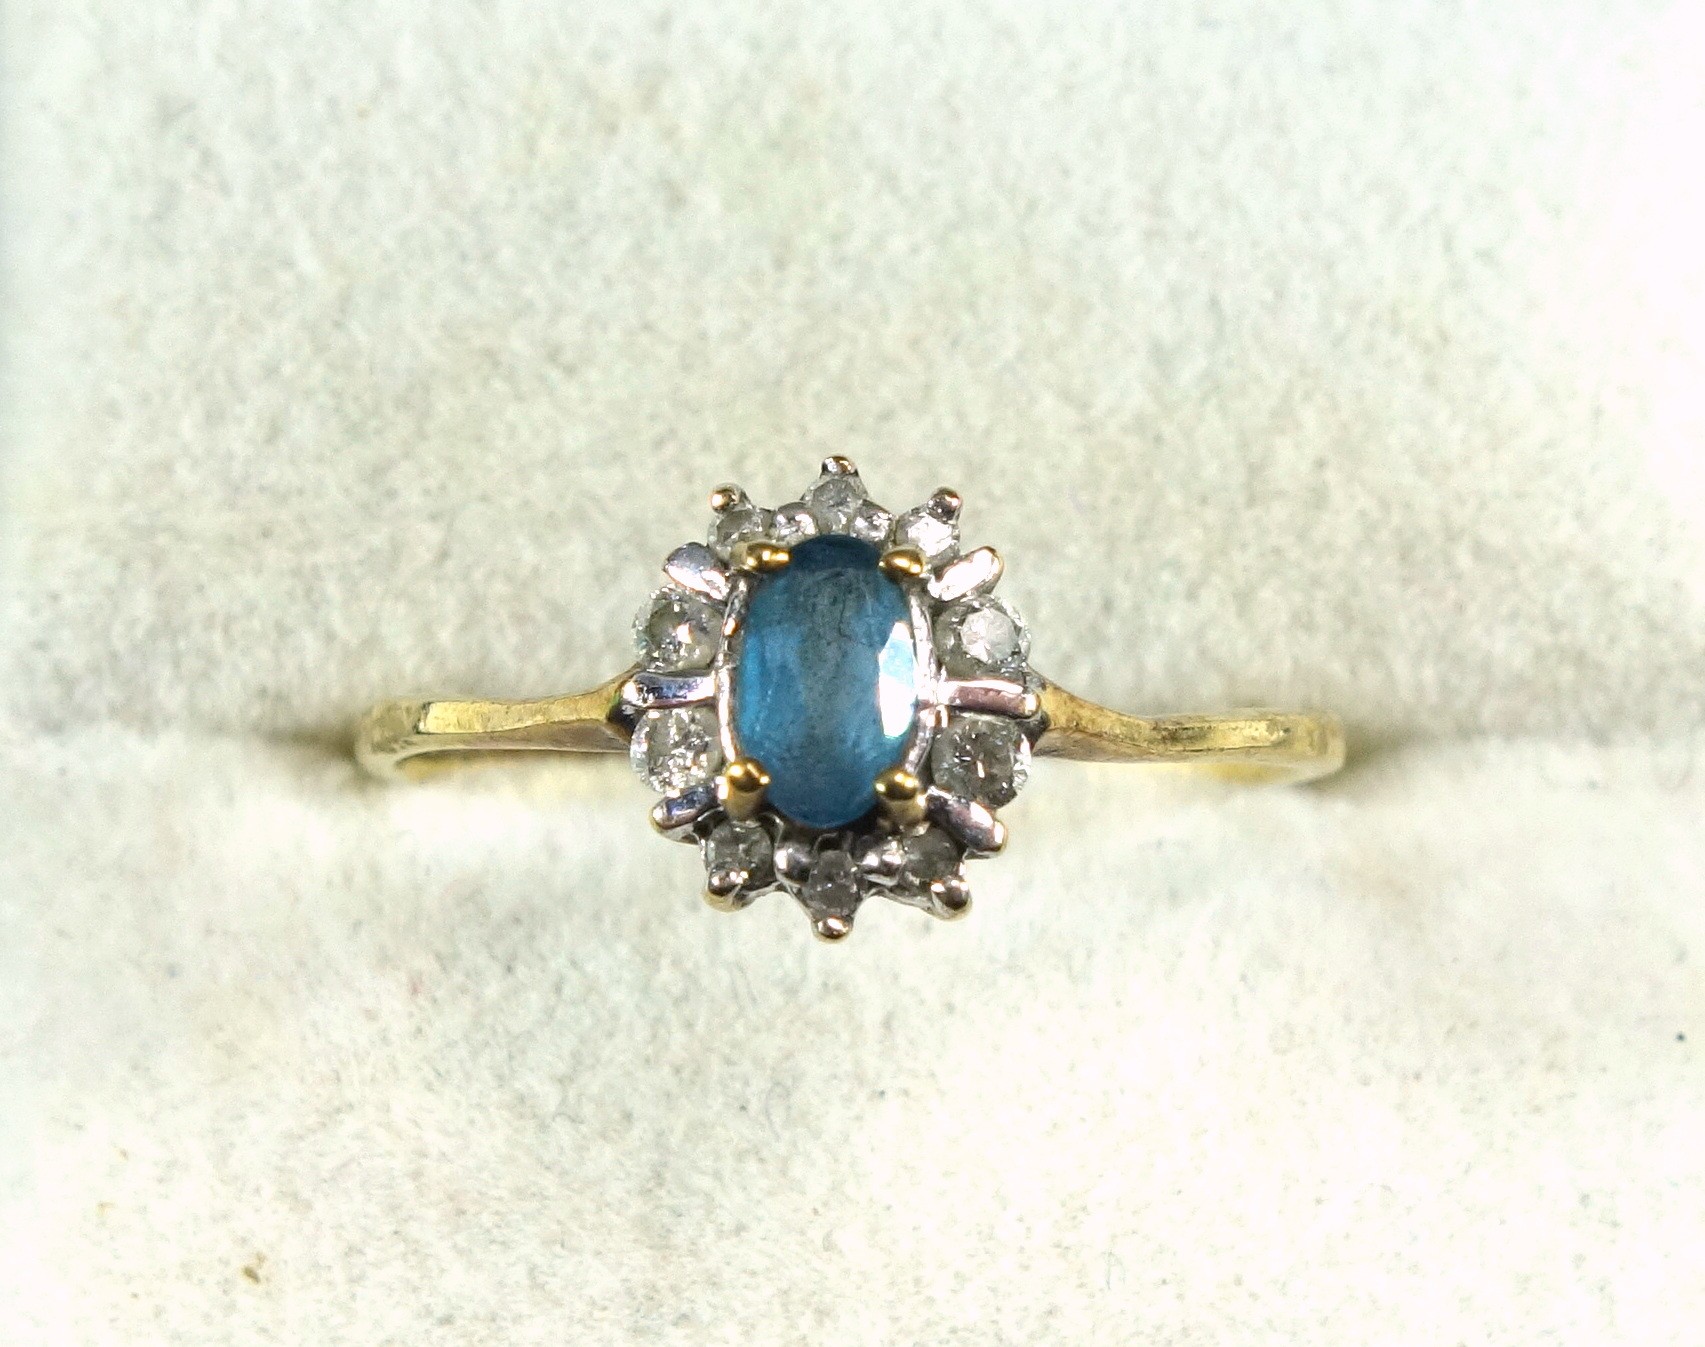 9ct gold ring set topaz and 6 diamonds, 9ct ring set pale green stone and brilliants, and a 9ct ring - Image 4 of 5